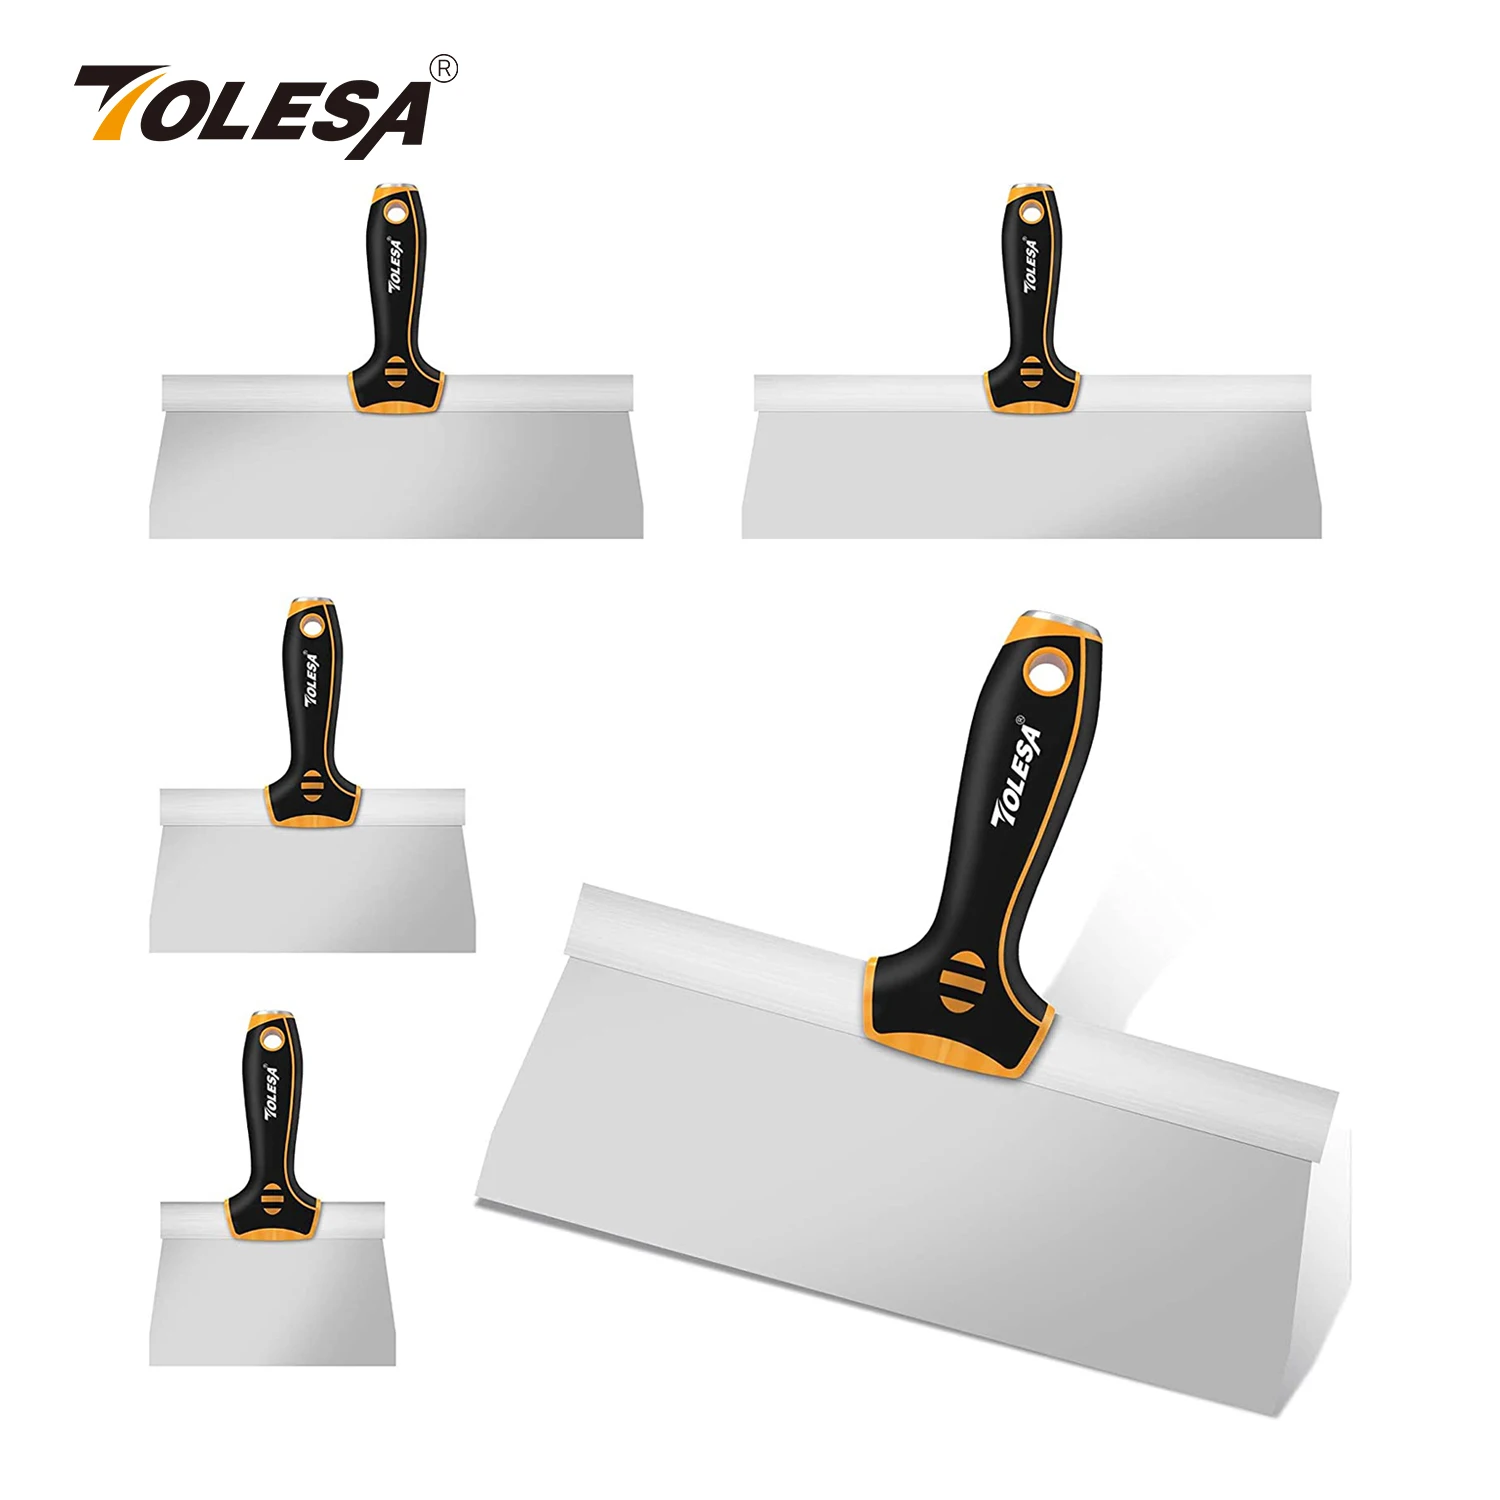 

Stainless Steel Taping Knife TOLESA 5PCS Drywall Taping Knife 6/8/10/12/14" with Soft Non-slip Grip Hammer End Drywall Mud Tools